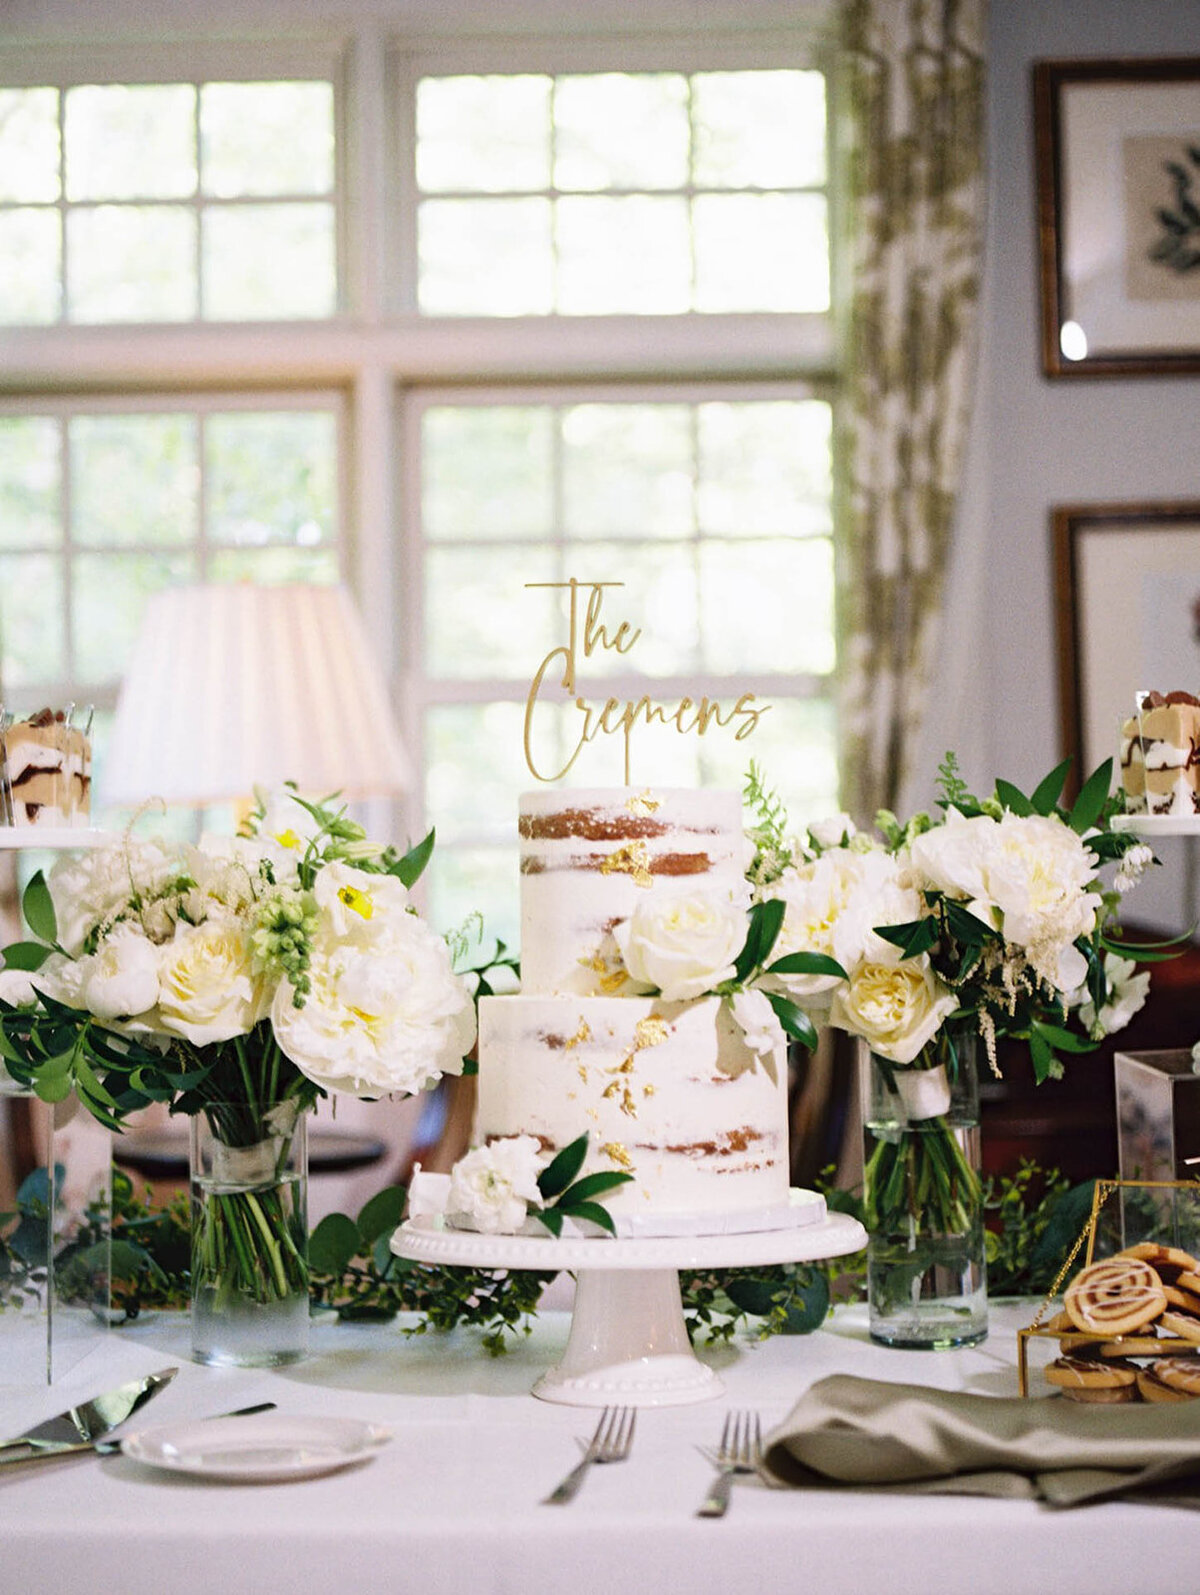 cake shot surrounded by flowers